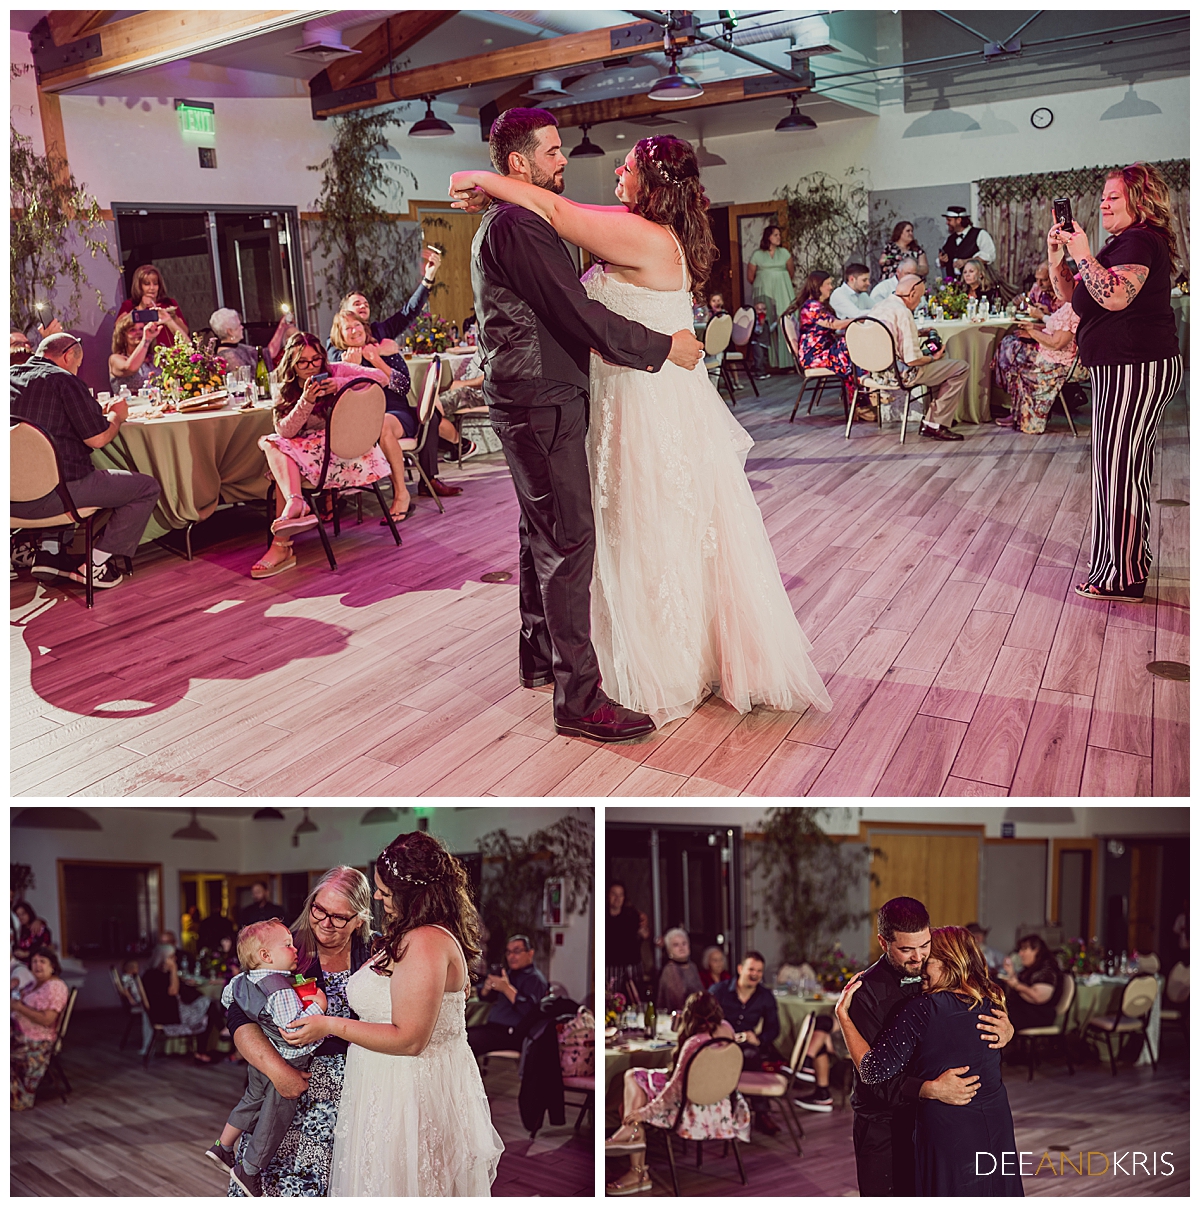 Three images: Top image of couple's first dance. Two bottom images of parents dancing with bride and groom.